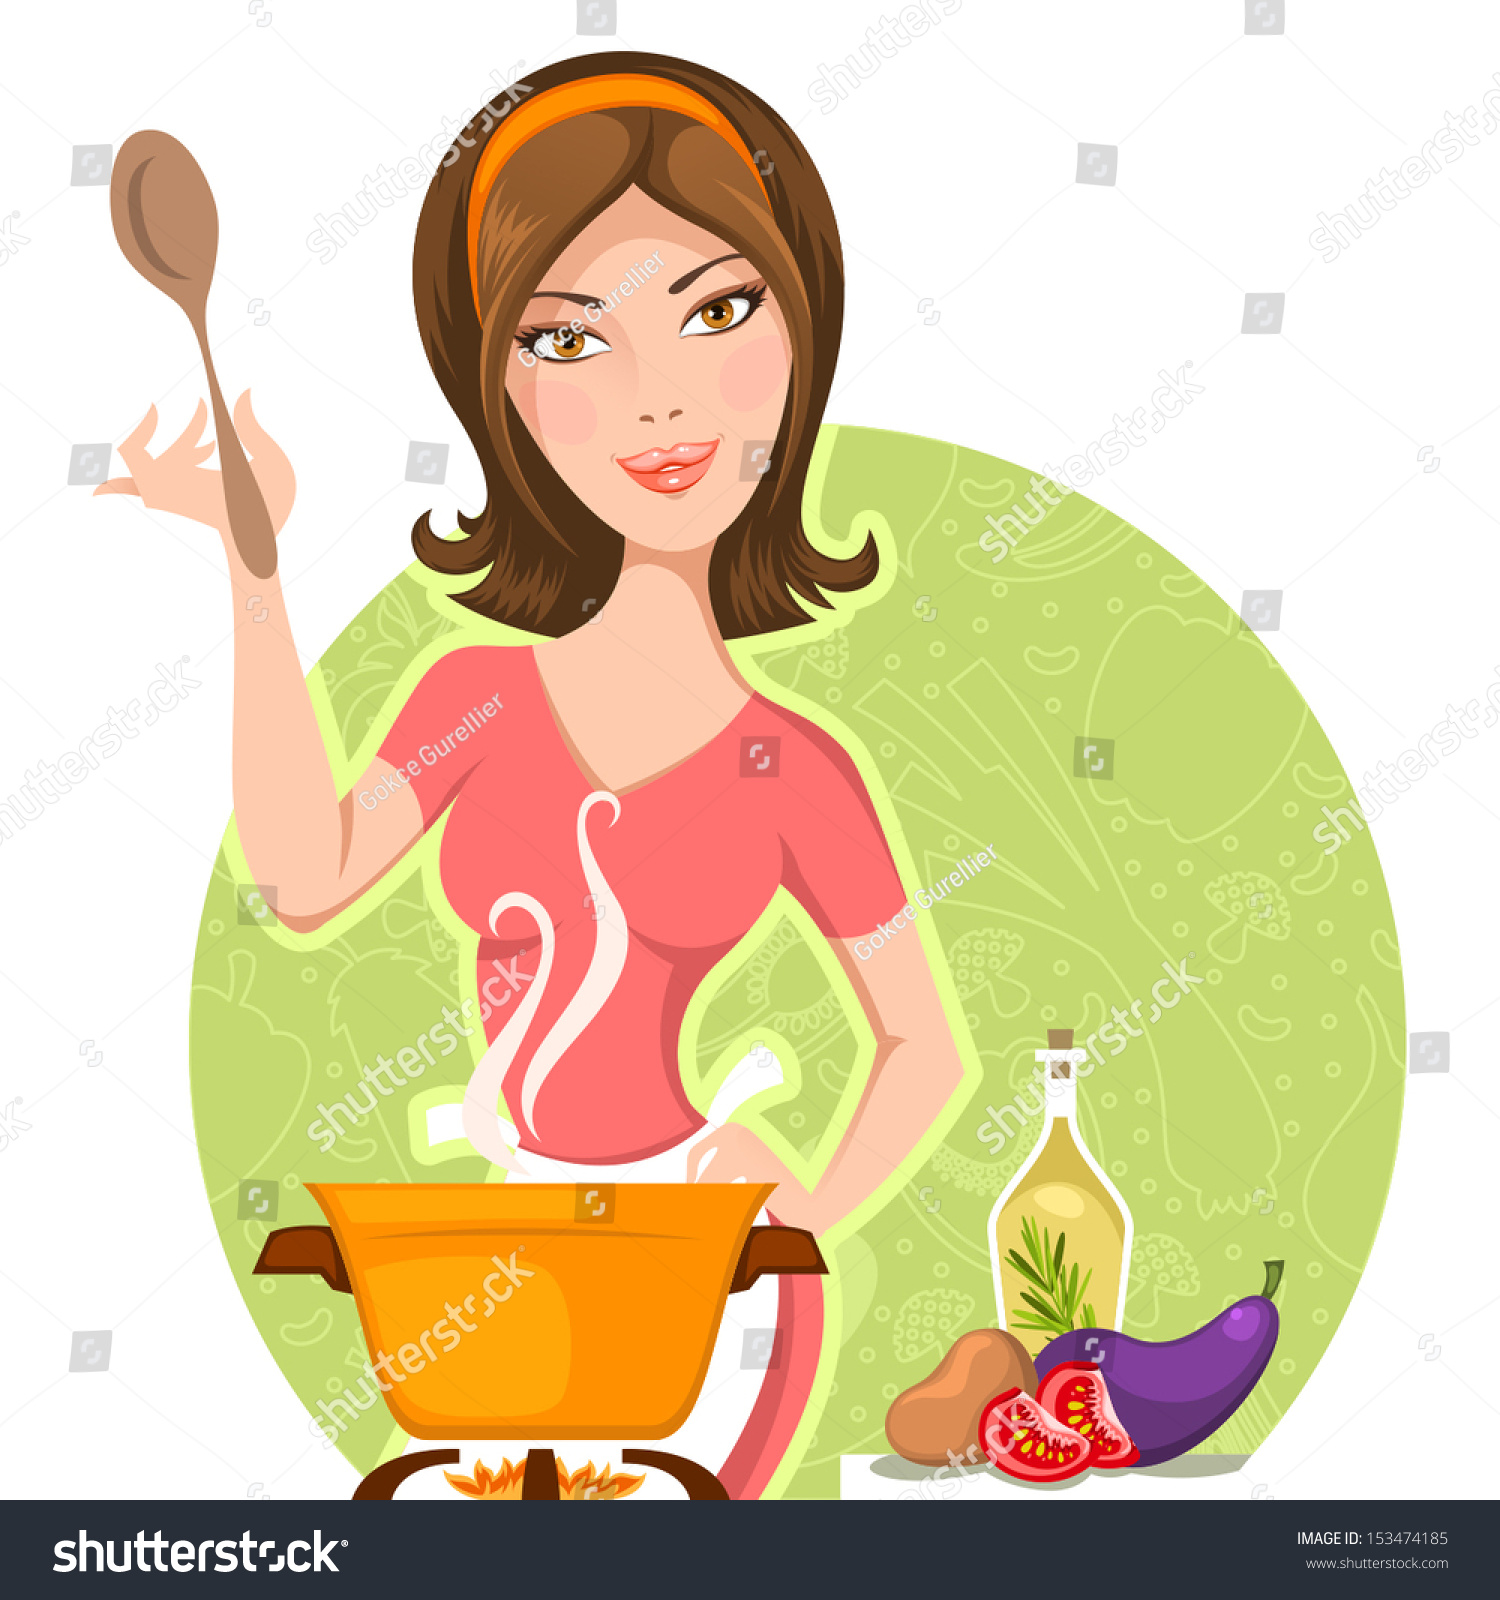 free clipart of girl cooking - photo #14